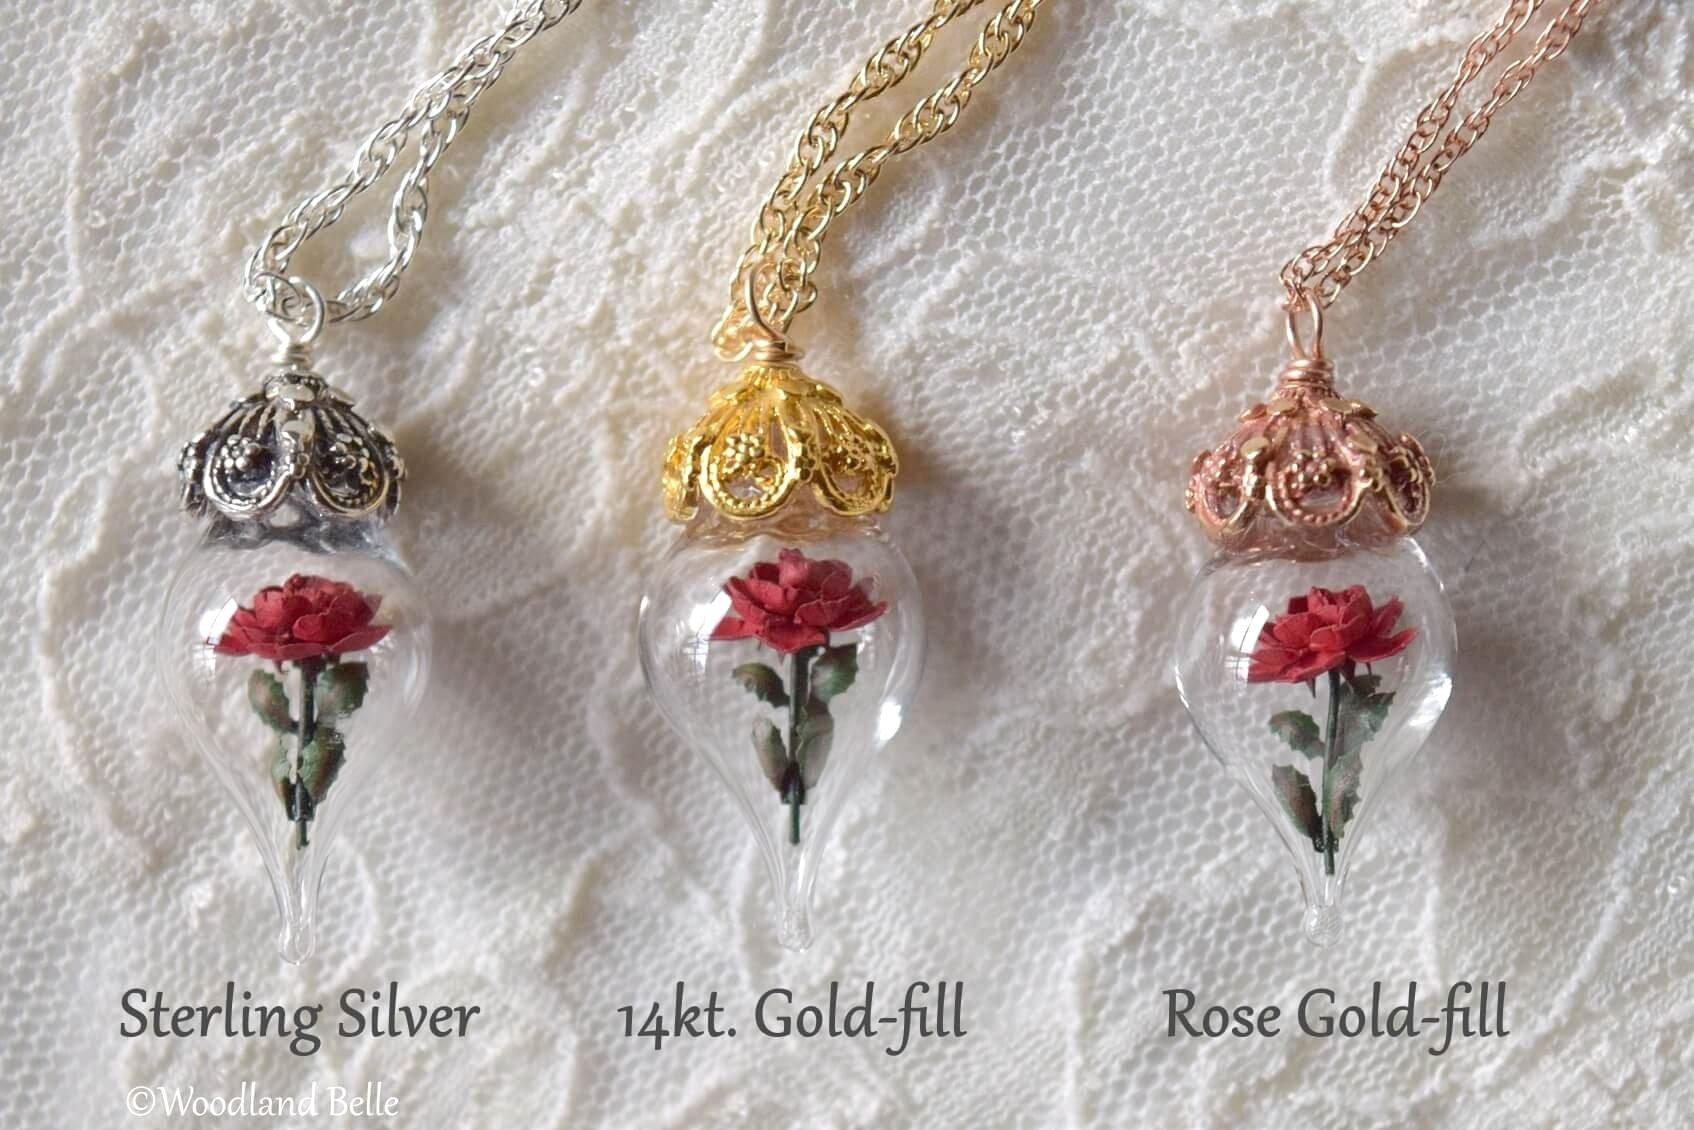 Snowdrop Necklace - White Snowdrop Flower Glass Pendant - Sterling Silver, Gold, or Rose Gold - Personalized Gift - by Woodland Belle